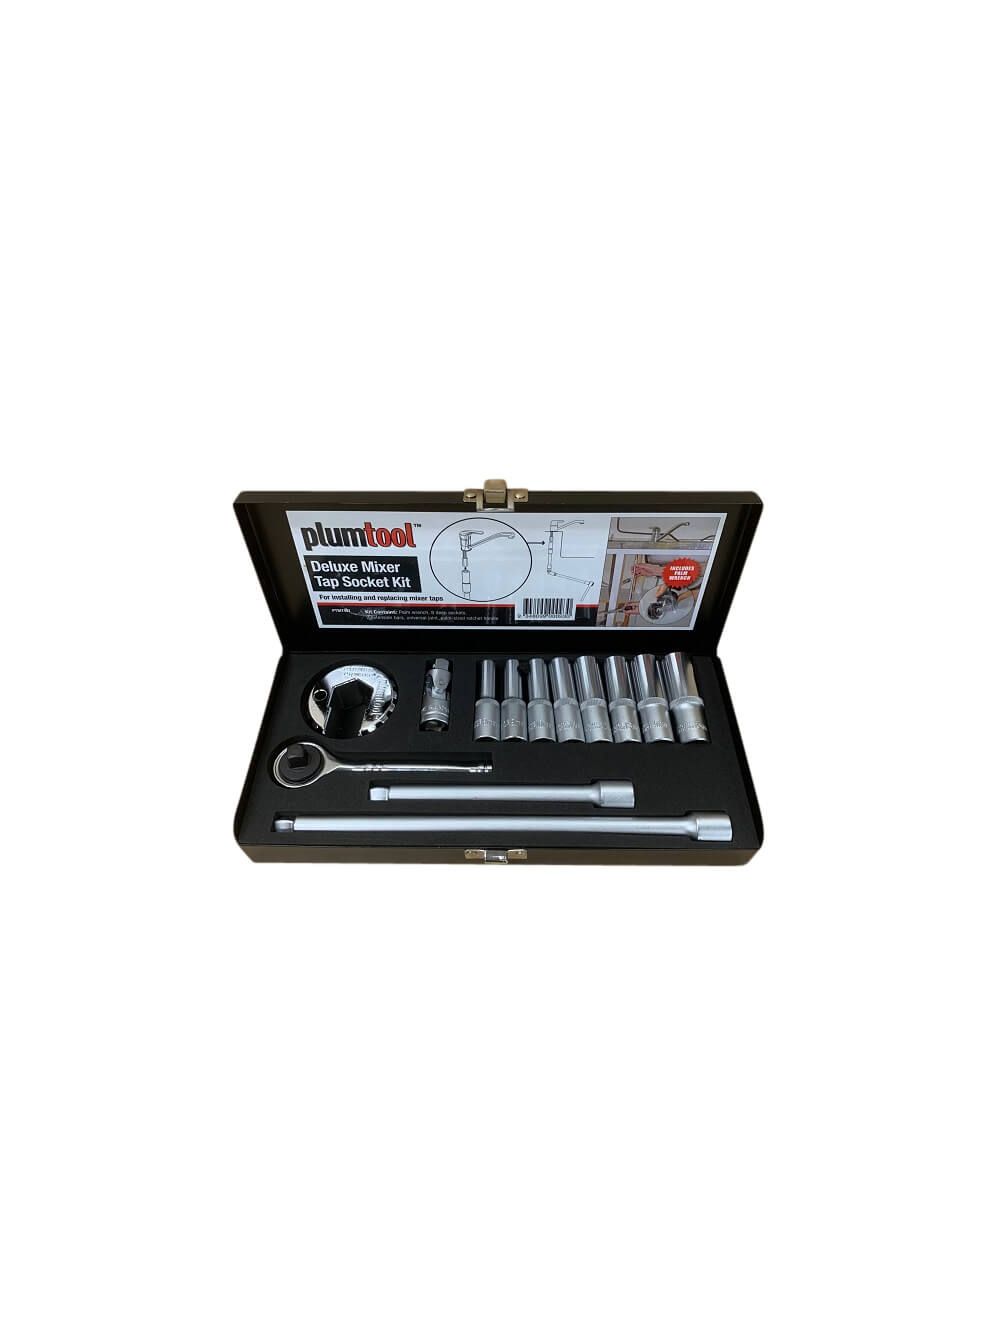 Details about   Plumtool Mixer Tap Socket Set Deluxe with Palm Wrench 9885 PTMT487 